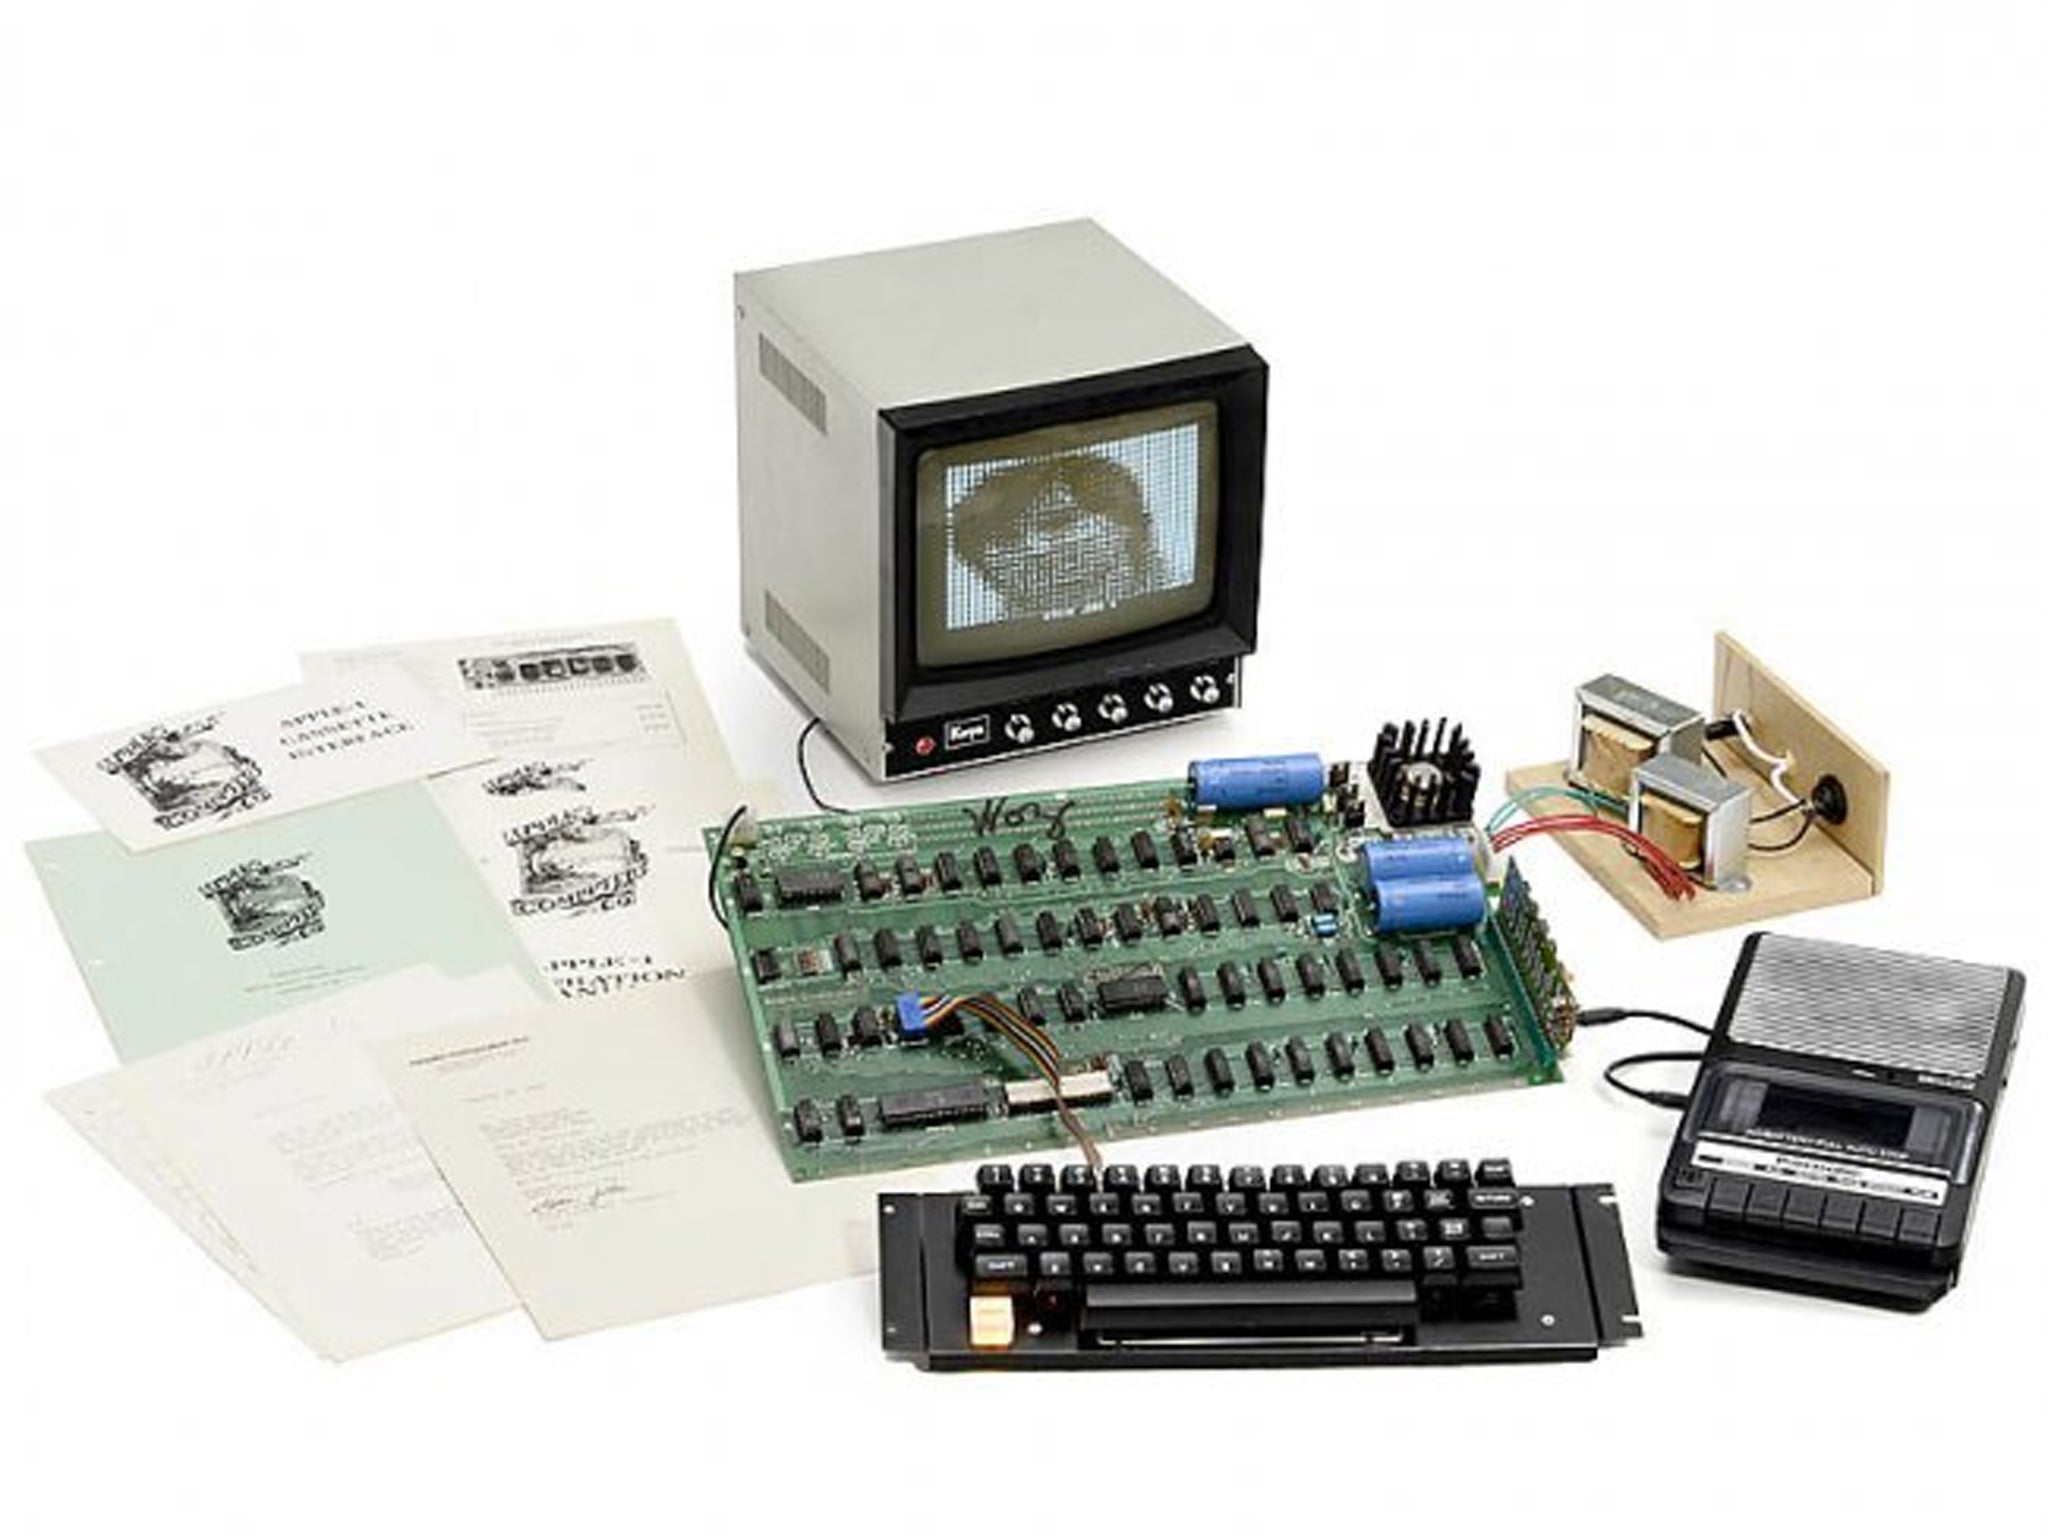 The Apple-1 computer being sold in Cologne tomorrow